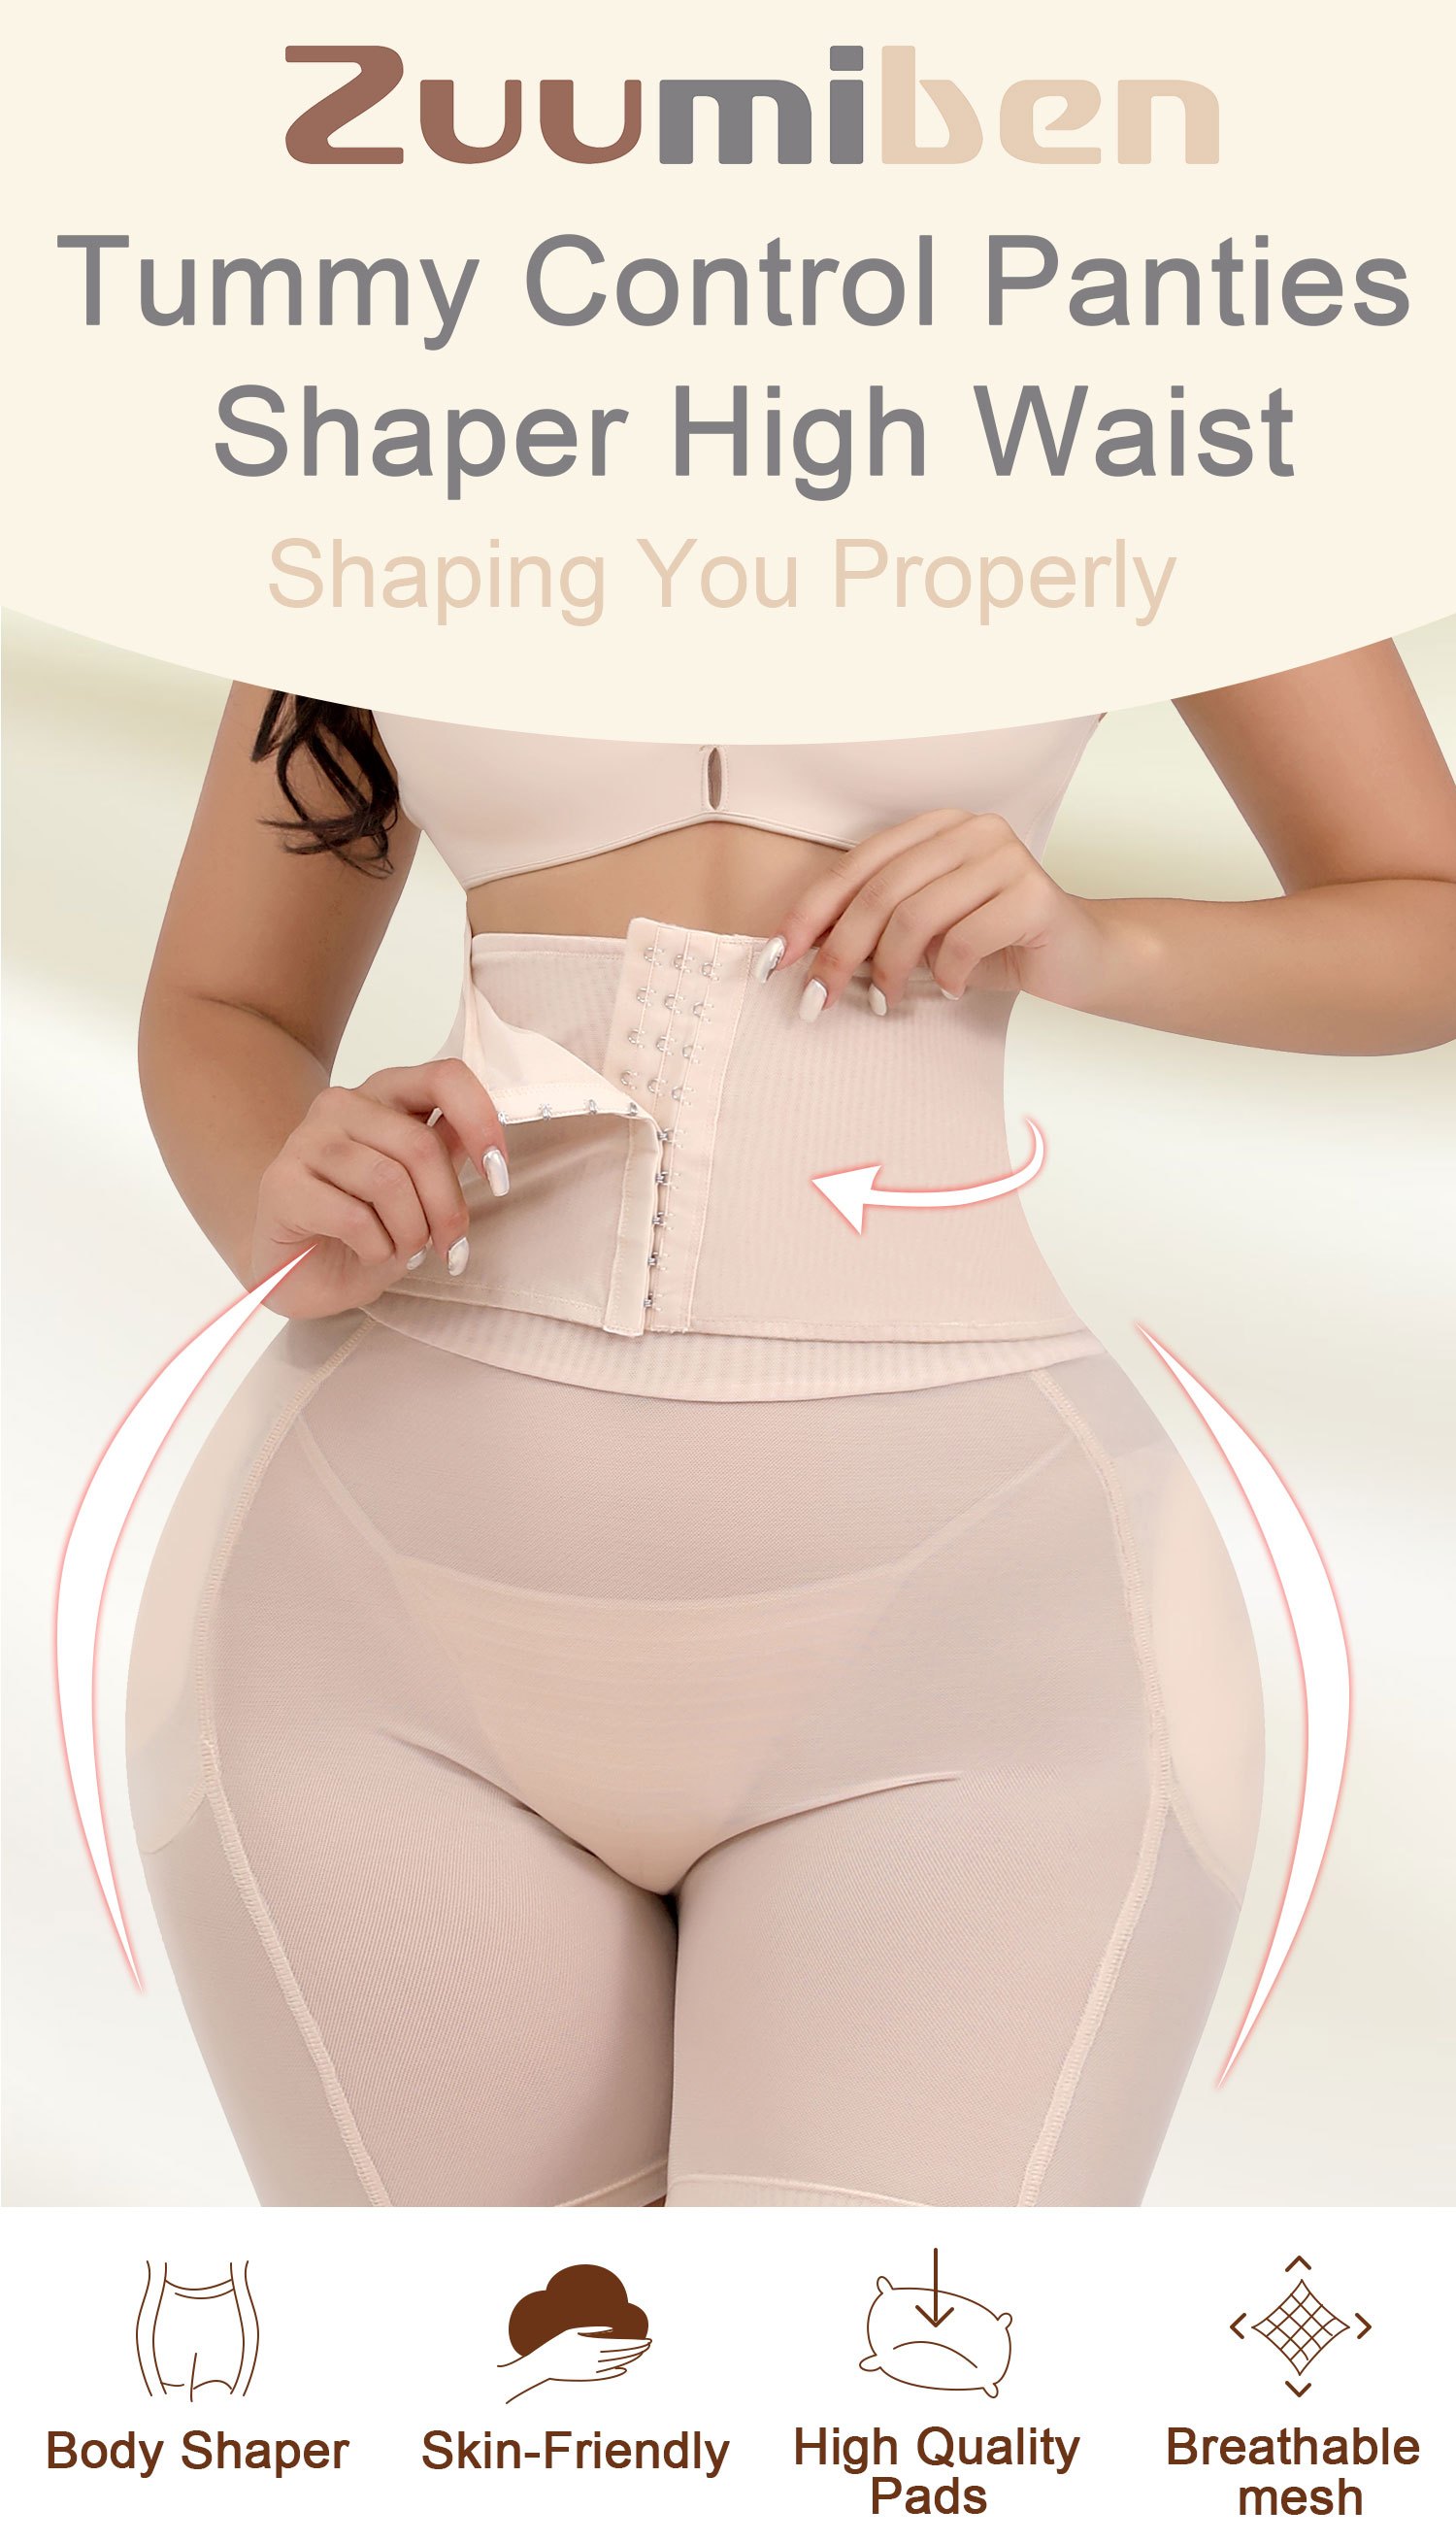 High Waist Abdomen Control Panties For Slimming And Shaping